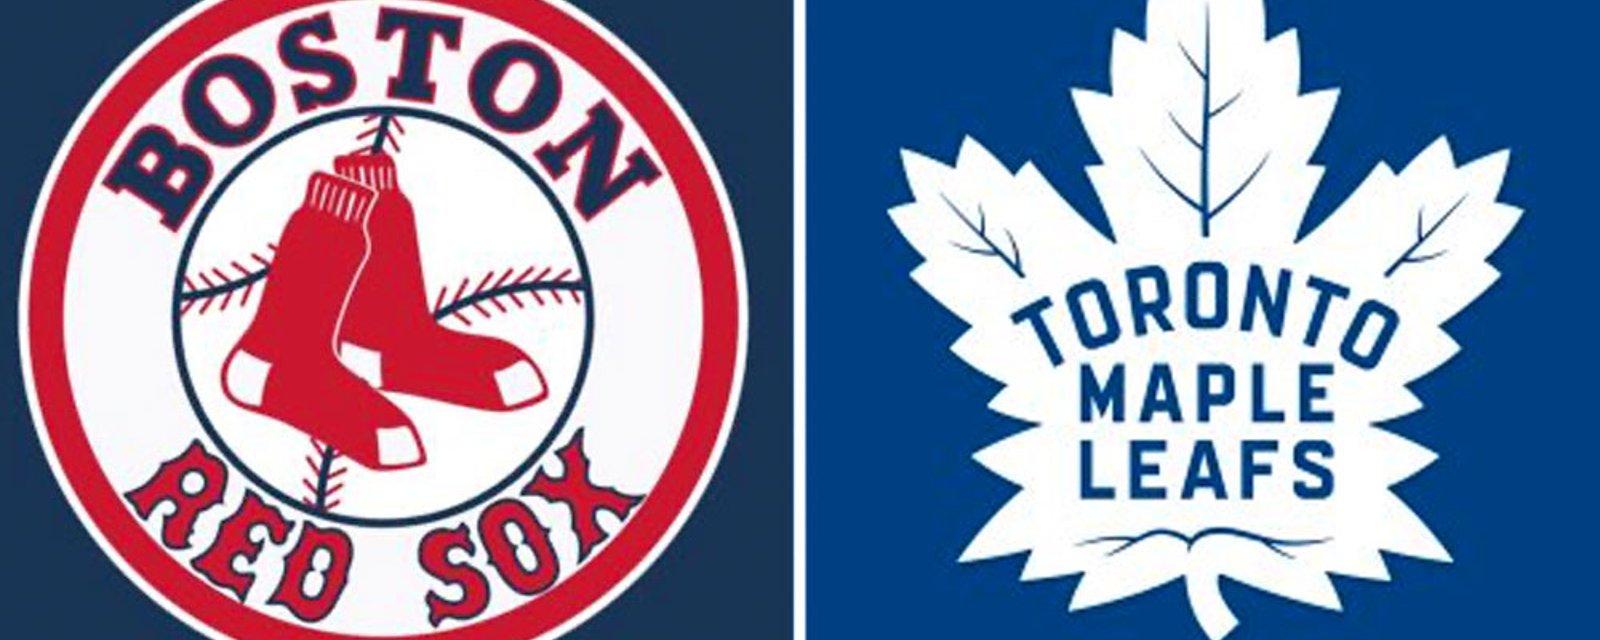 MLB's Boston Red Sox make a pitch to buy the Toronto Maple Leafs